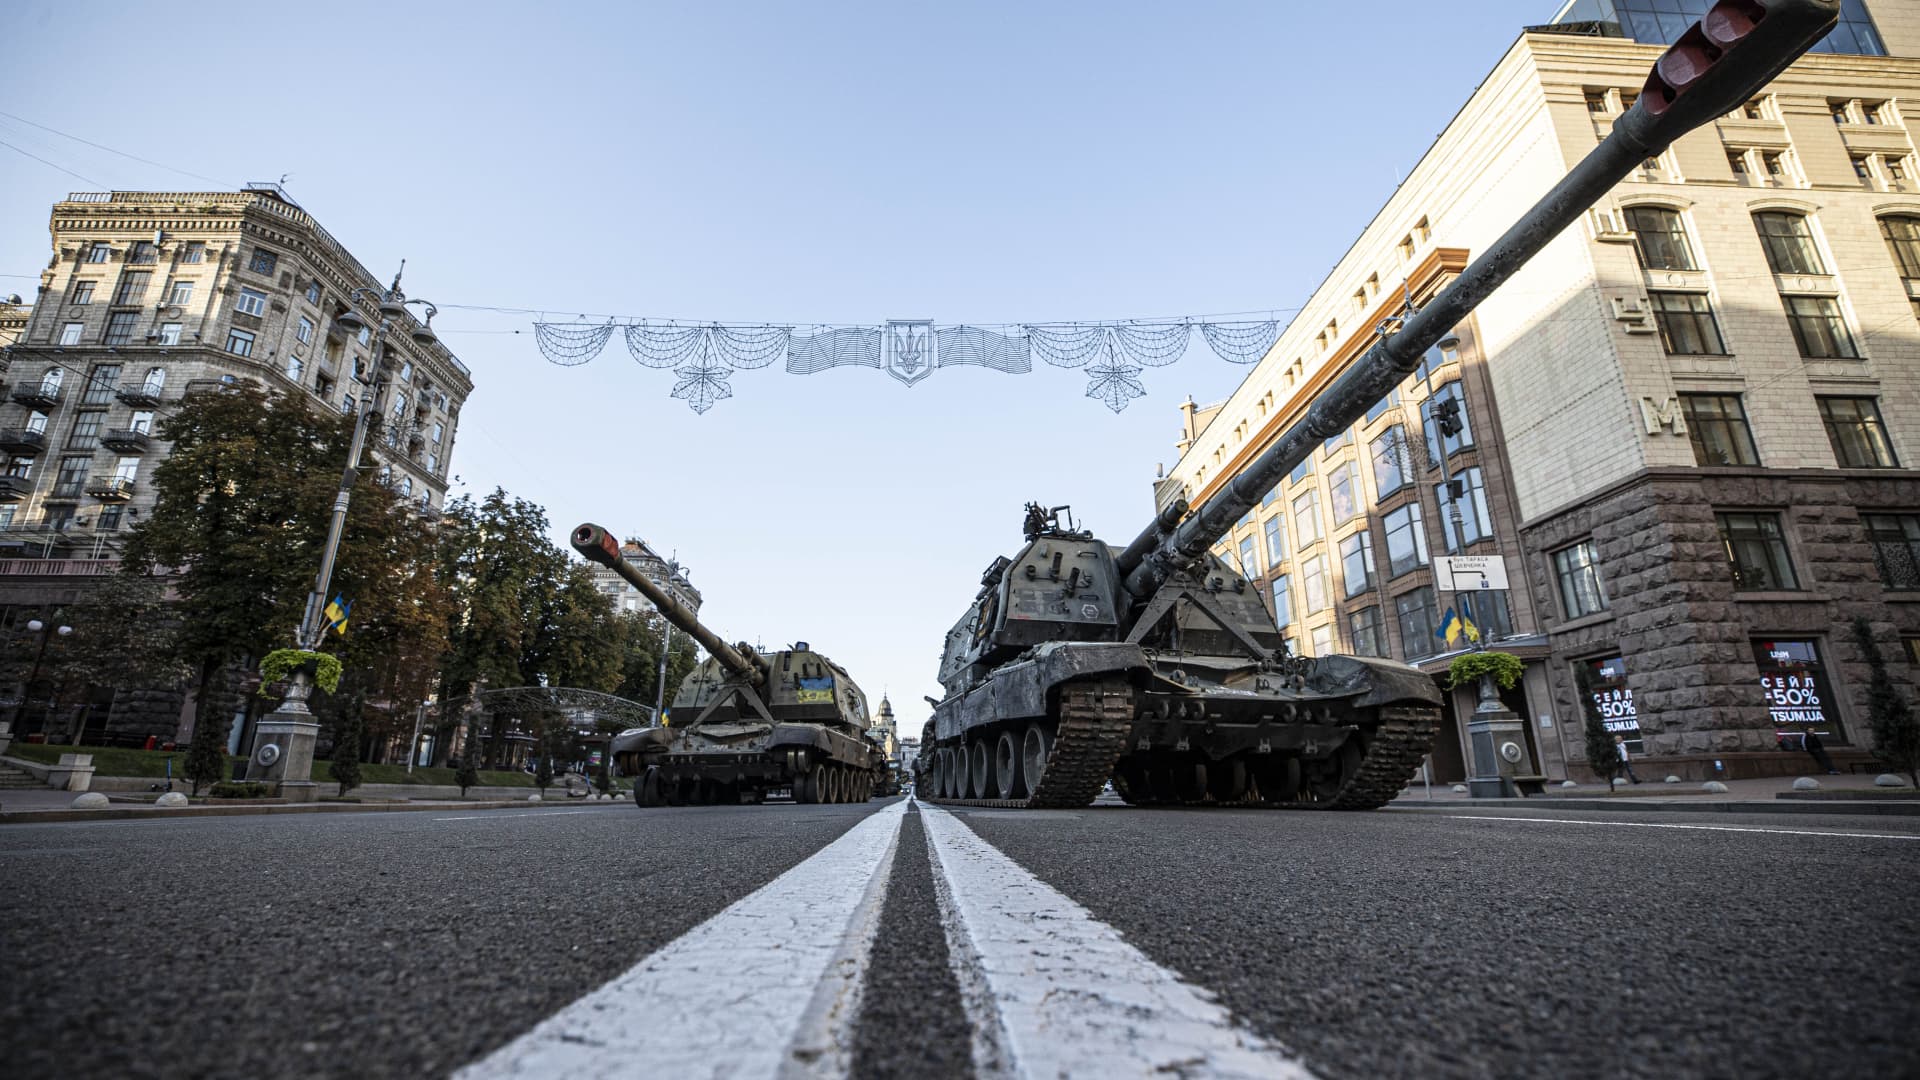 Tanks captured from Russian army on display at the Khreschatyk Street in Kyiv, Ukraine on August 25, 2022 as the Kremlin's war in Ukraine continues.